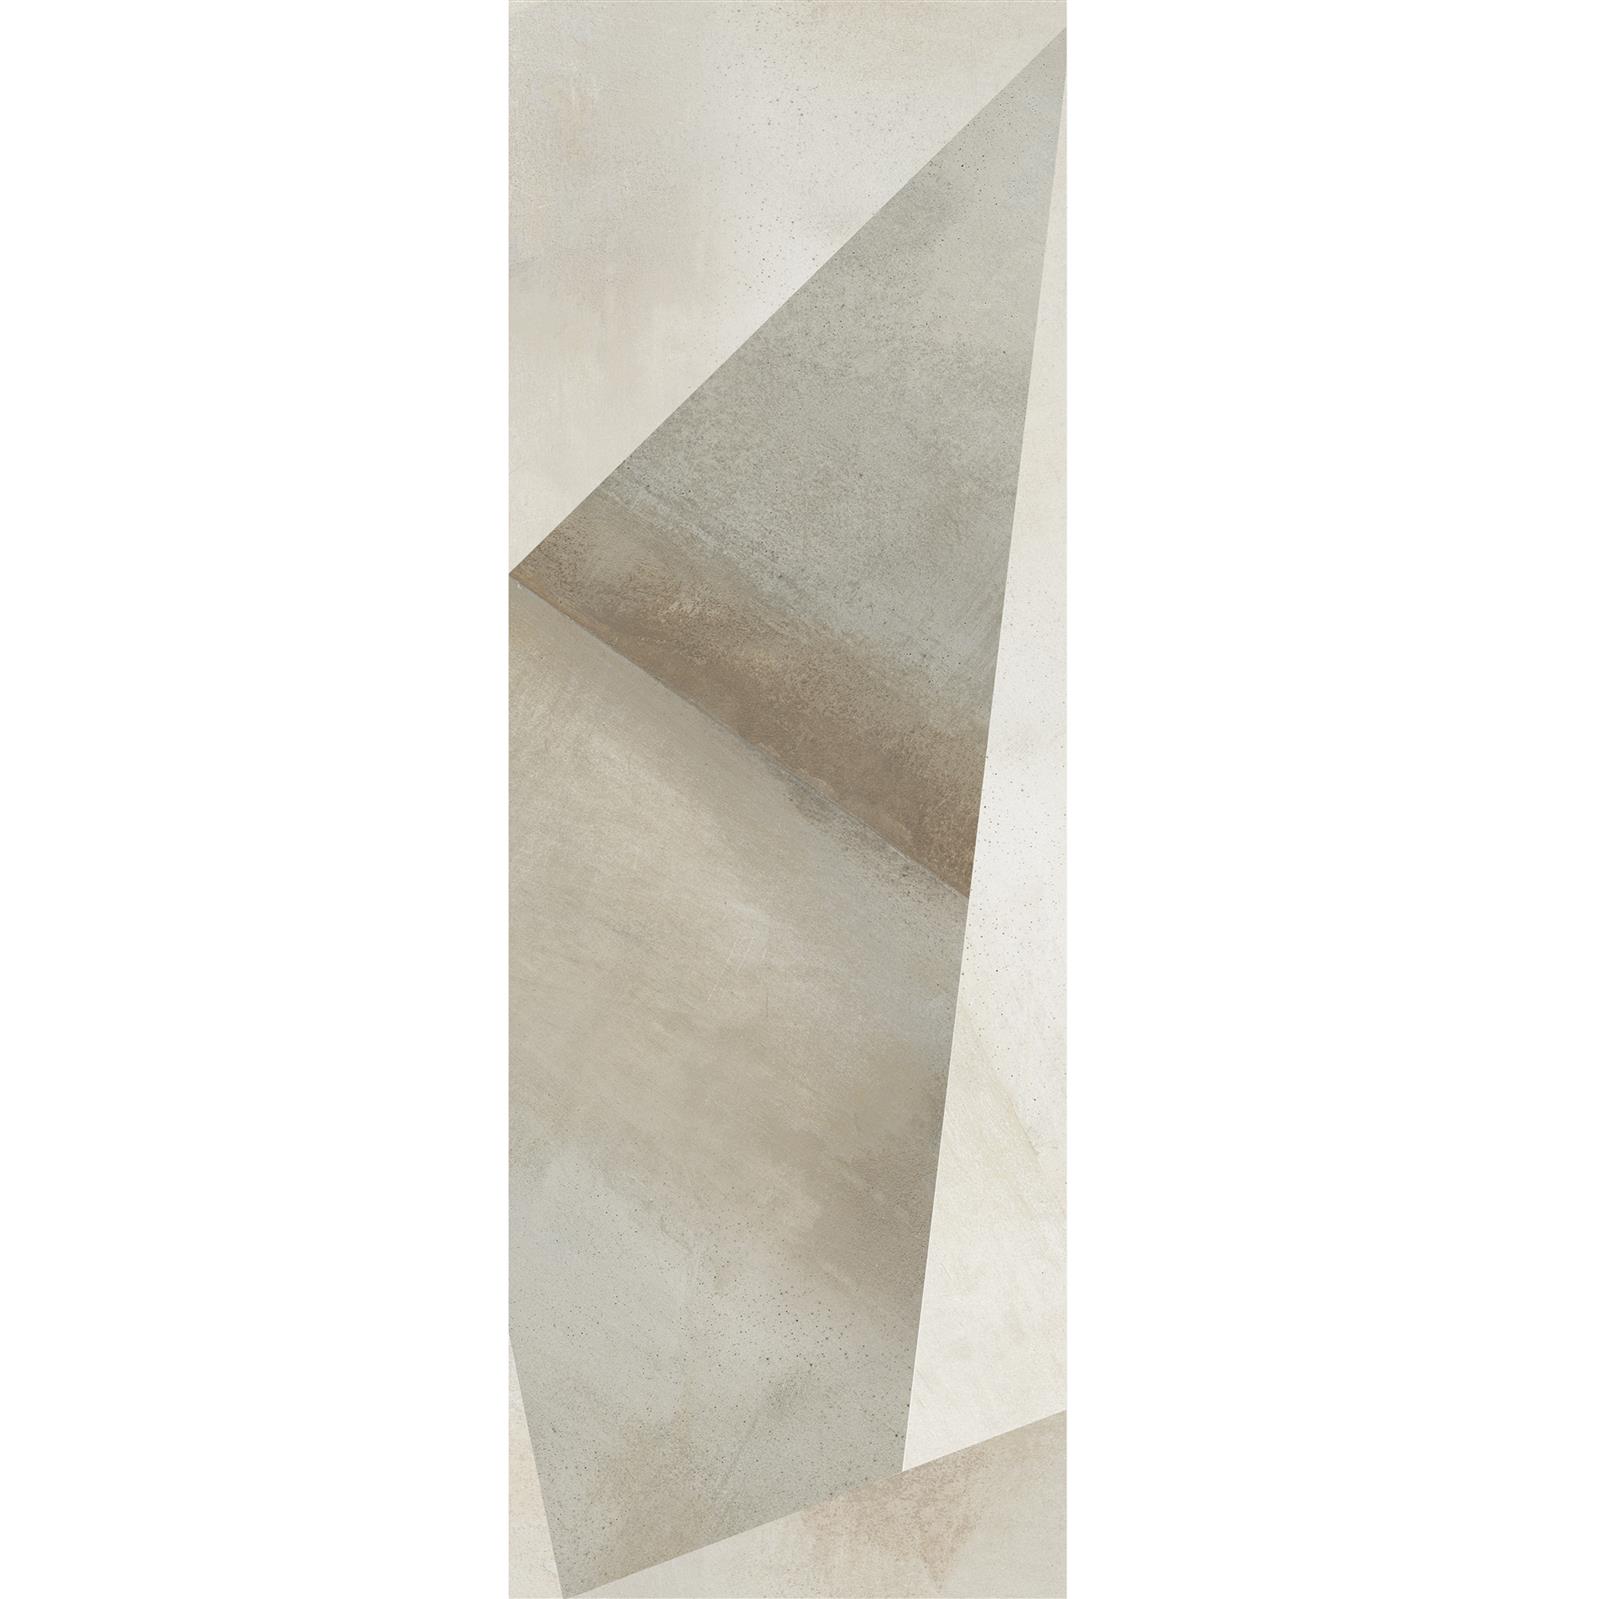 Wall Tiles Queens Rectified Sand Decor 5 30x90cm